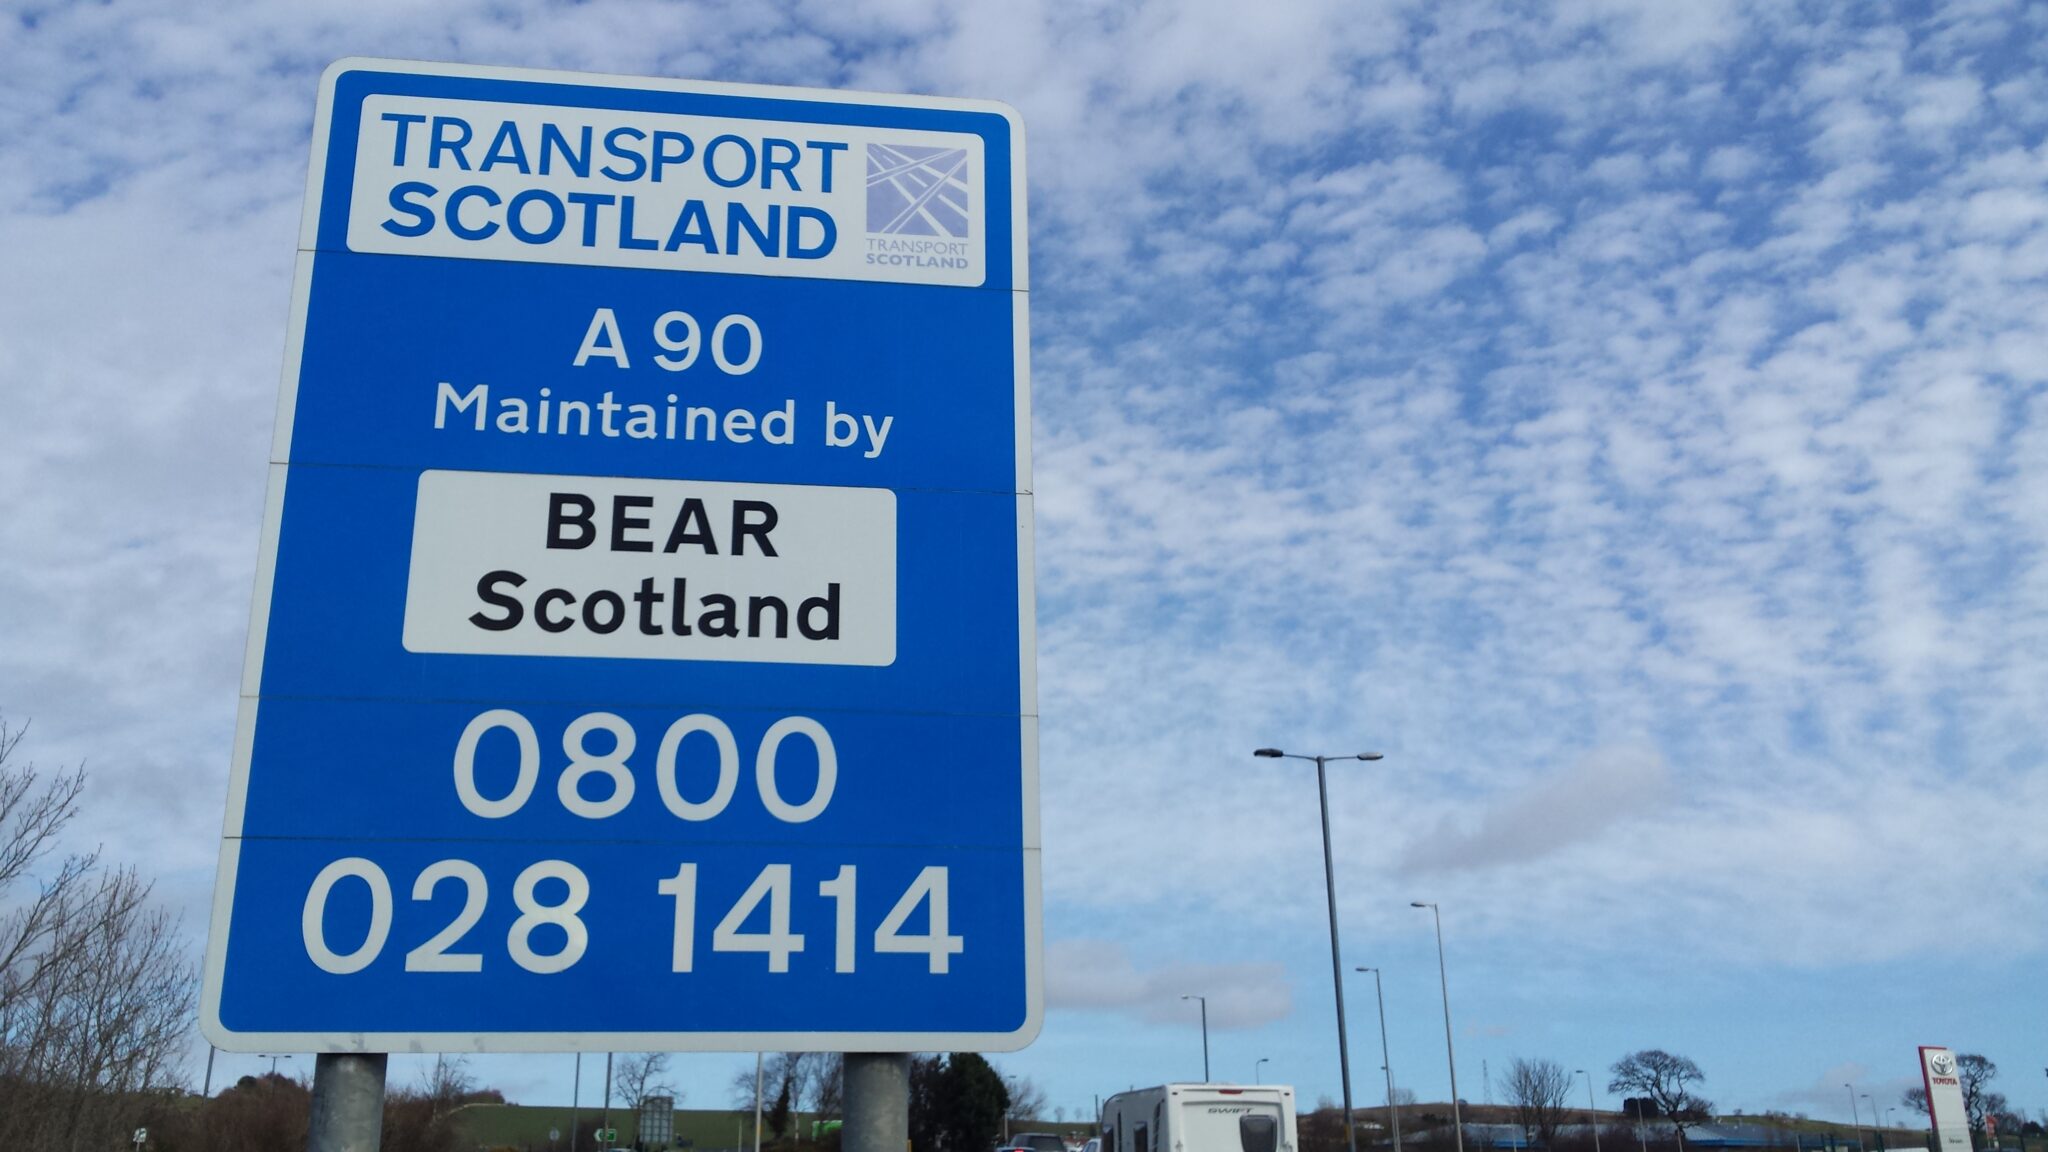 £50,000 SURFACING IMPROVEMENTS PLANNED FOR THE A90 SOUTHBOUND APPROACH TO KINGSWAY